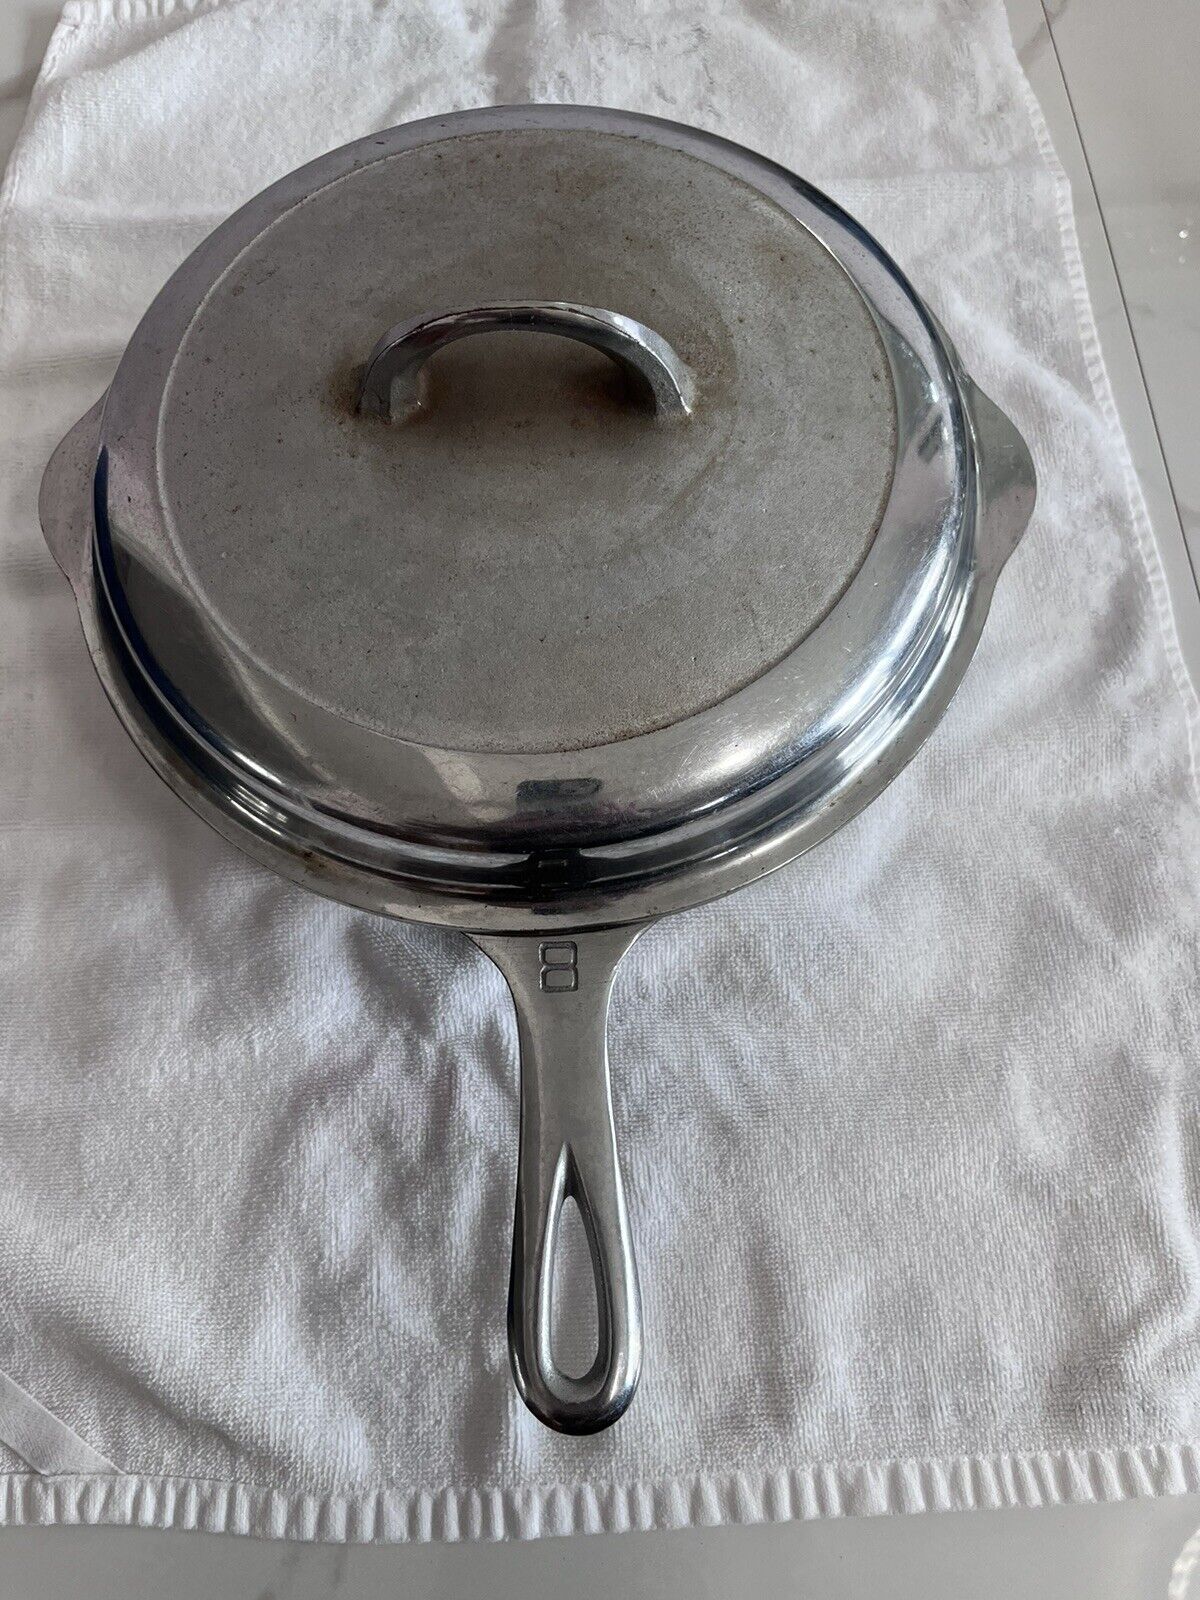 Griswold Plated Chicken Fryer No 8 With Lid    Sits Flat No Wobble